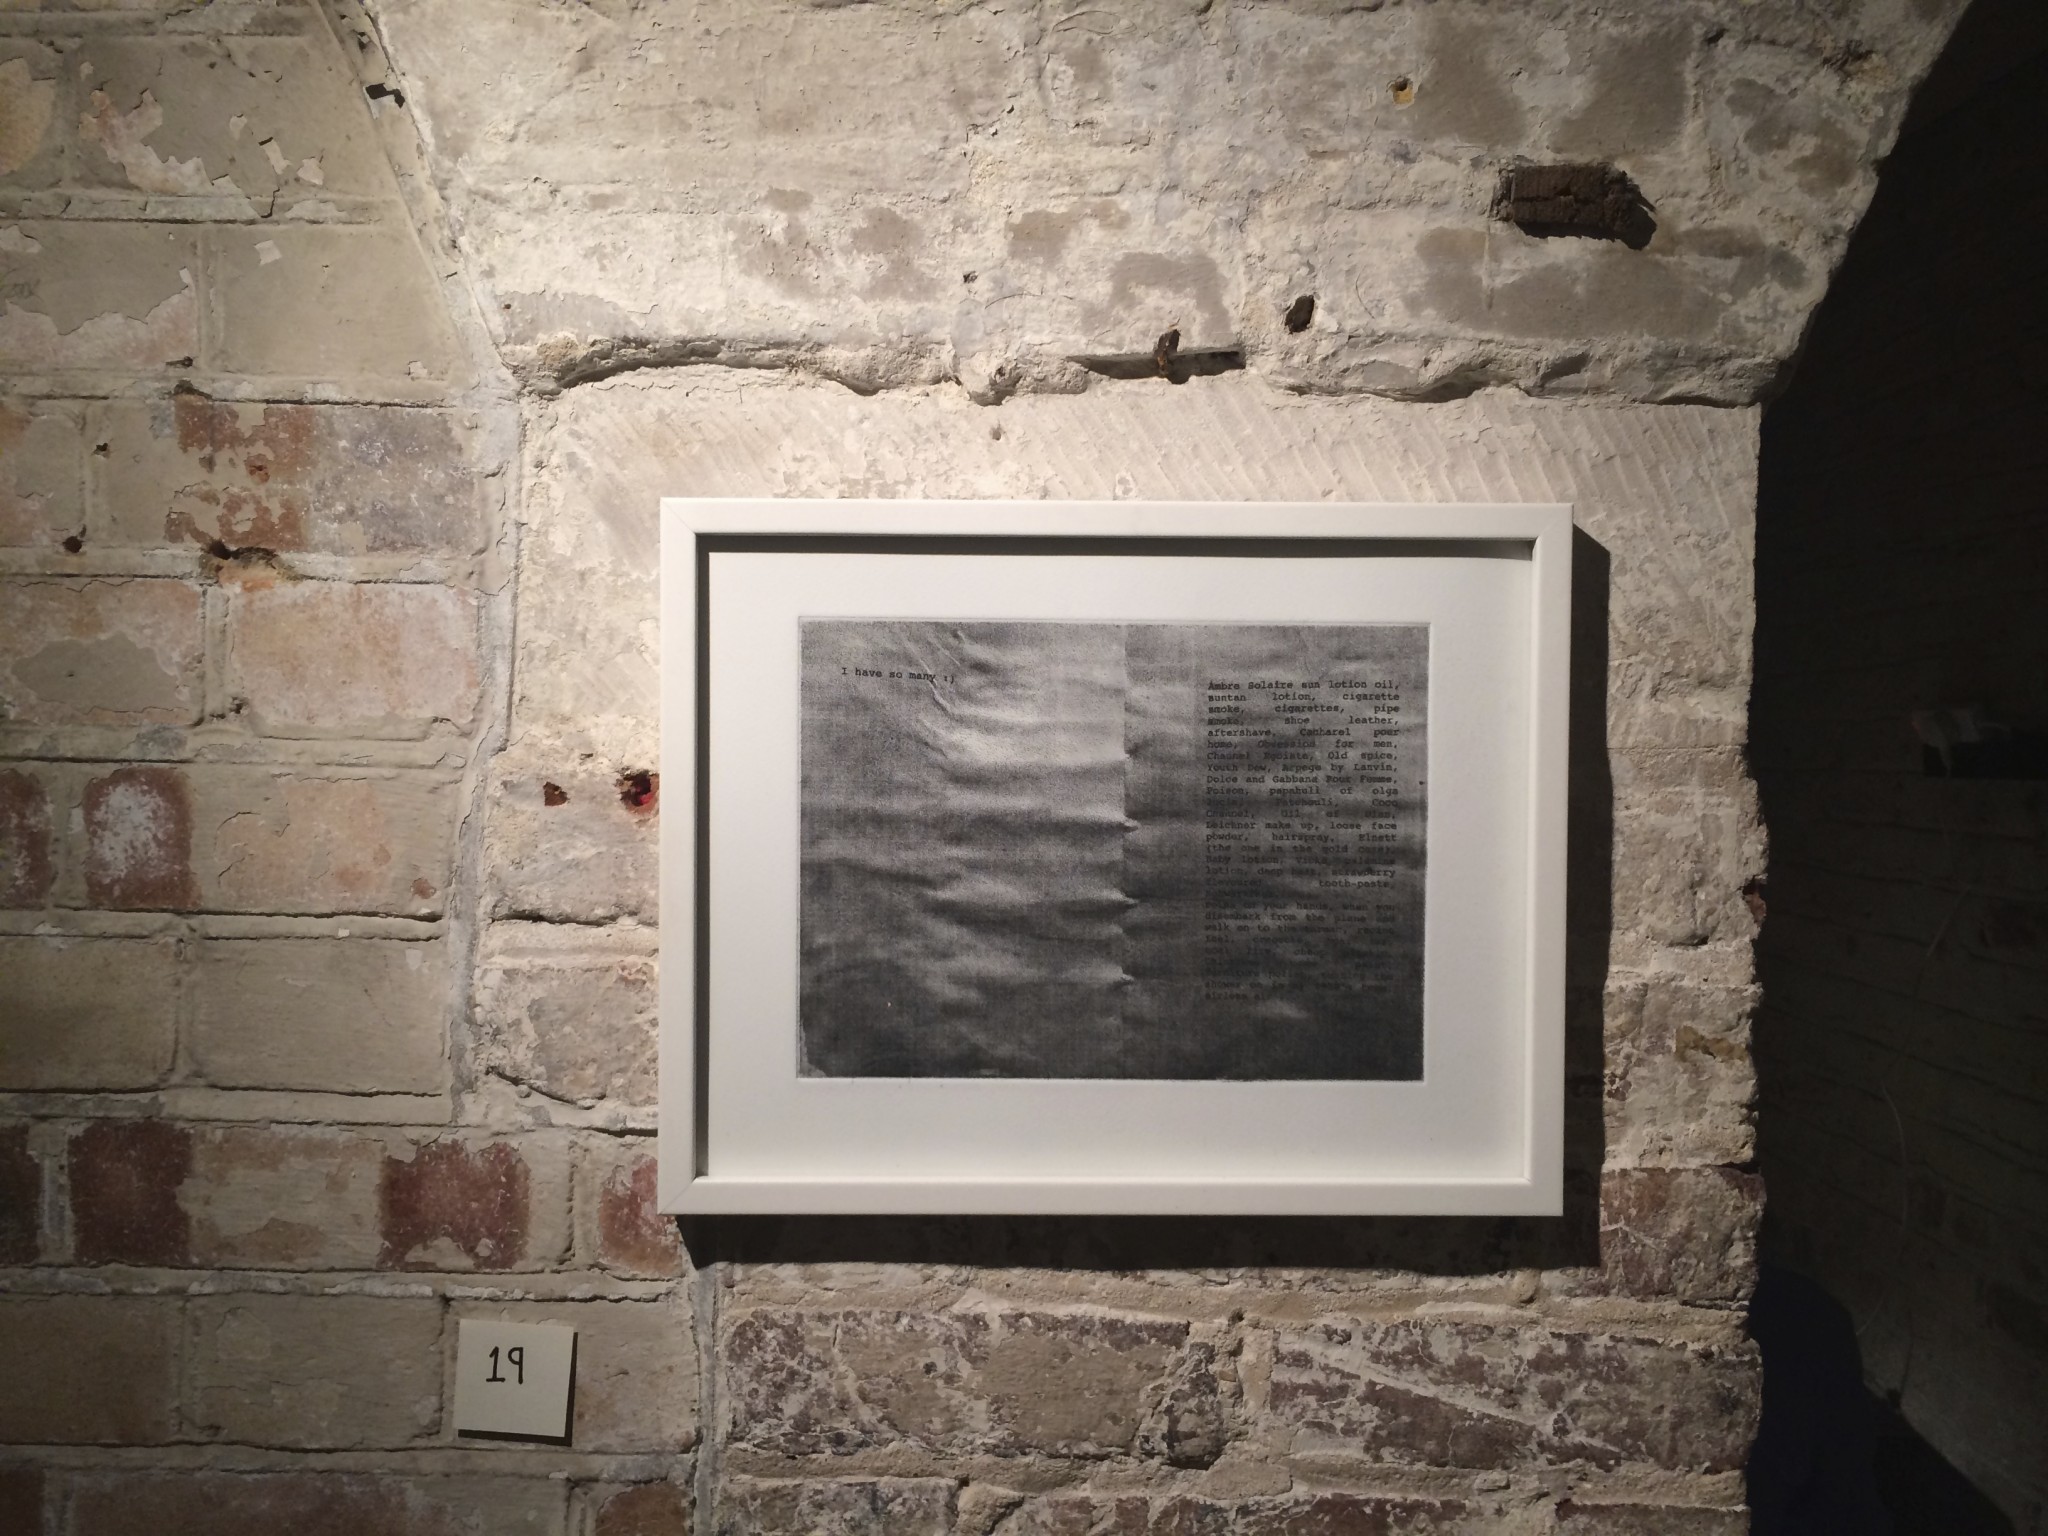 'A sense of', photo-etching @ Illuminations, Crypt Gallery